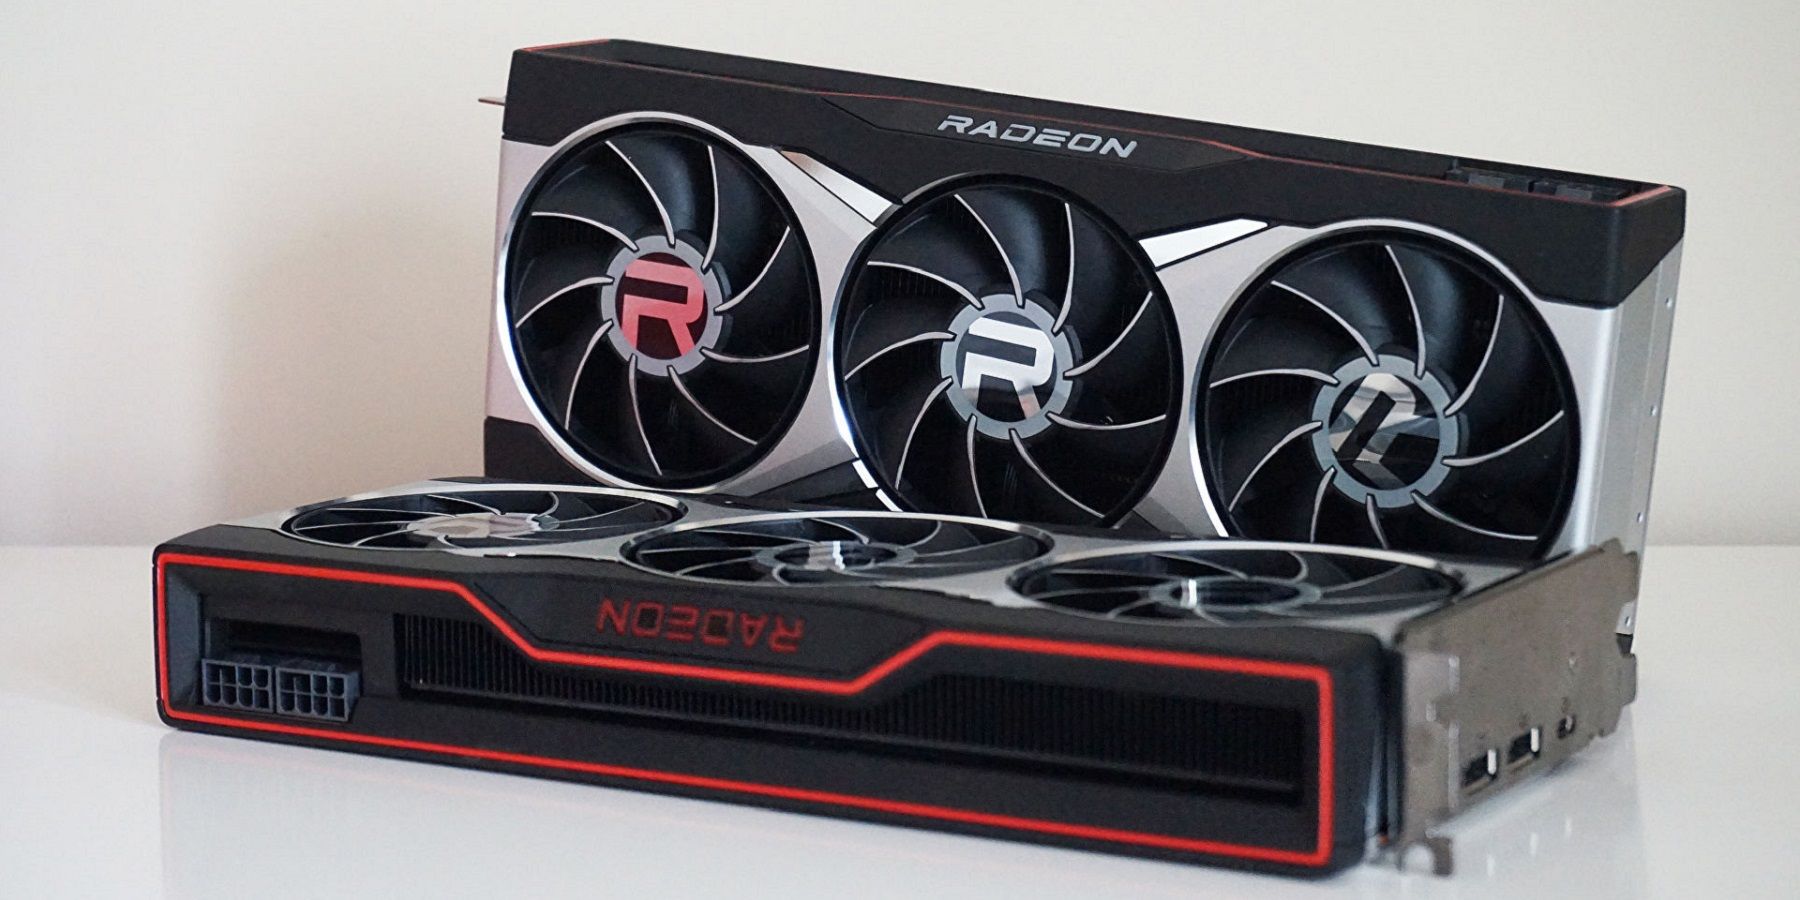 A photo of a couple of AMD Radeon graphics cards on a white background.